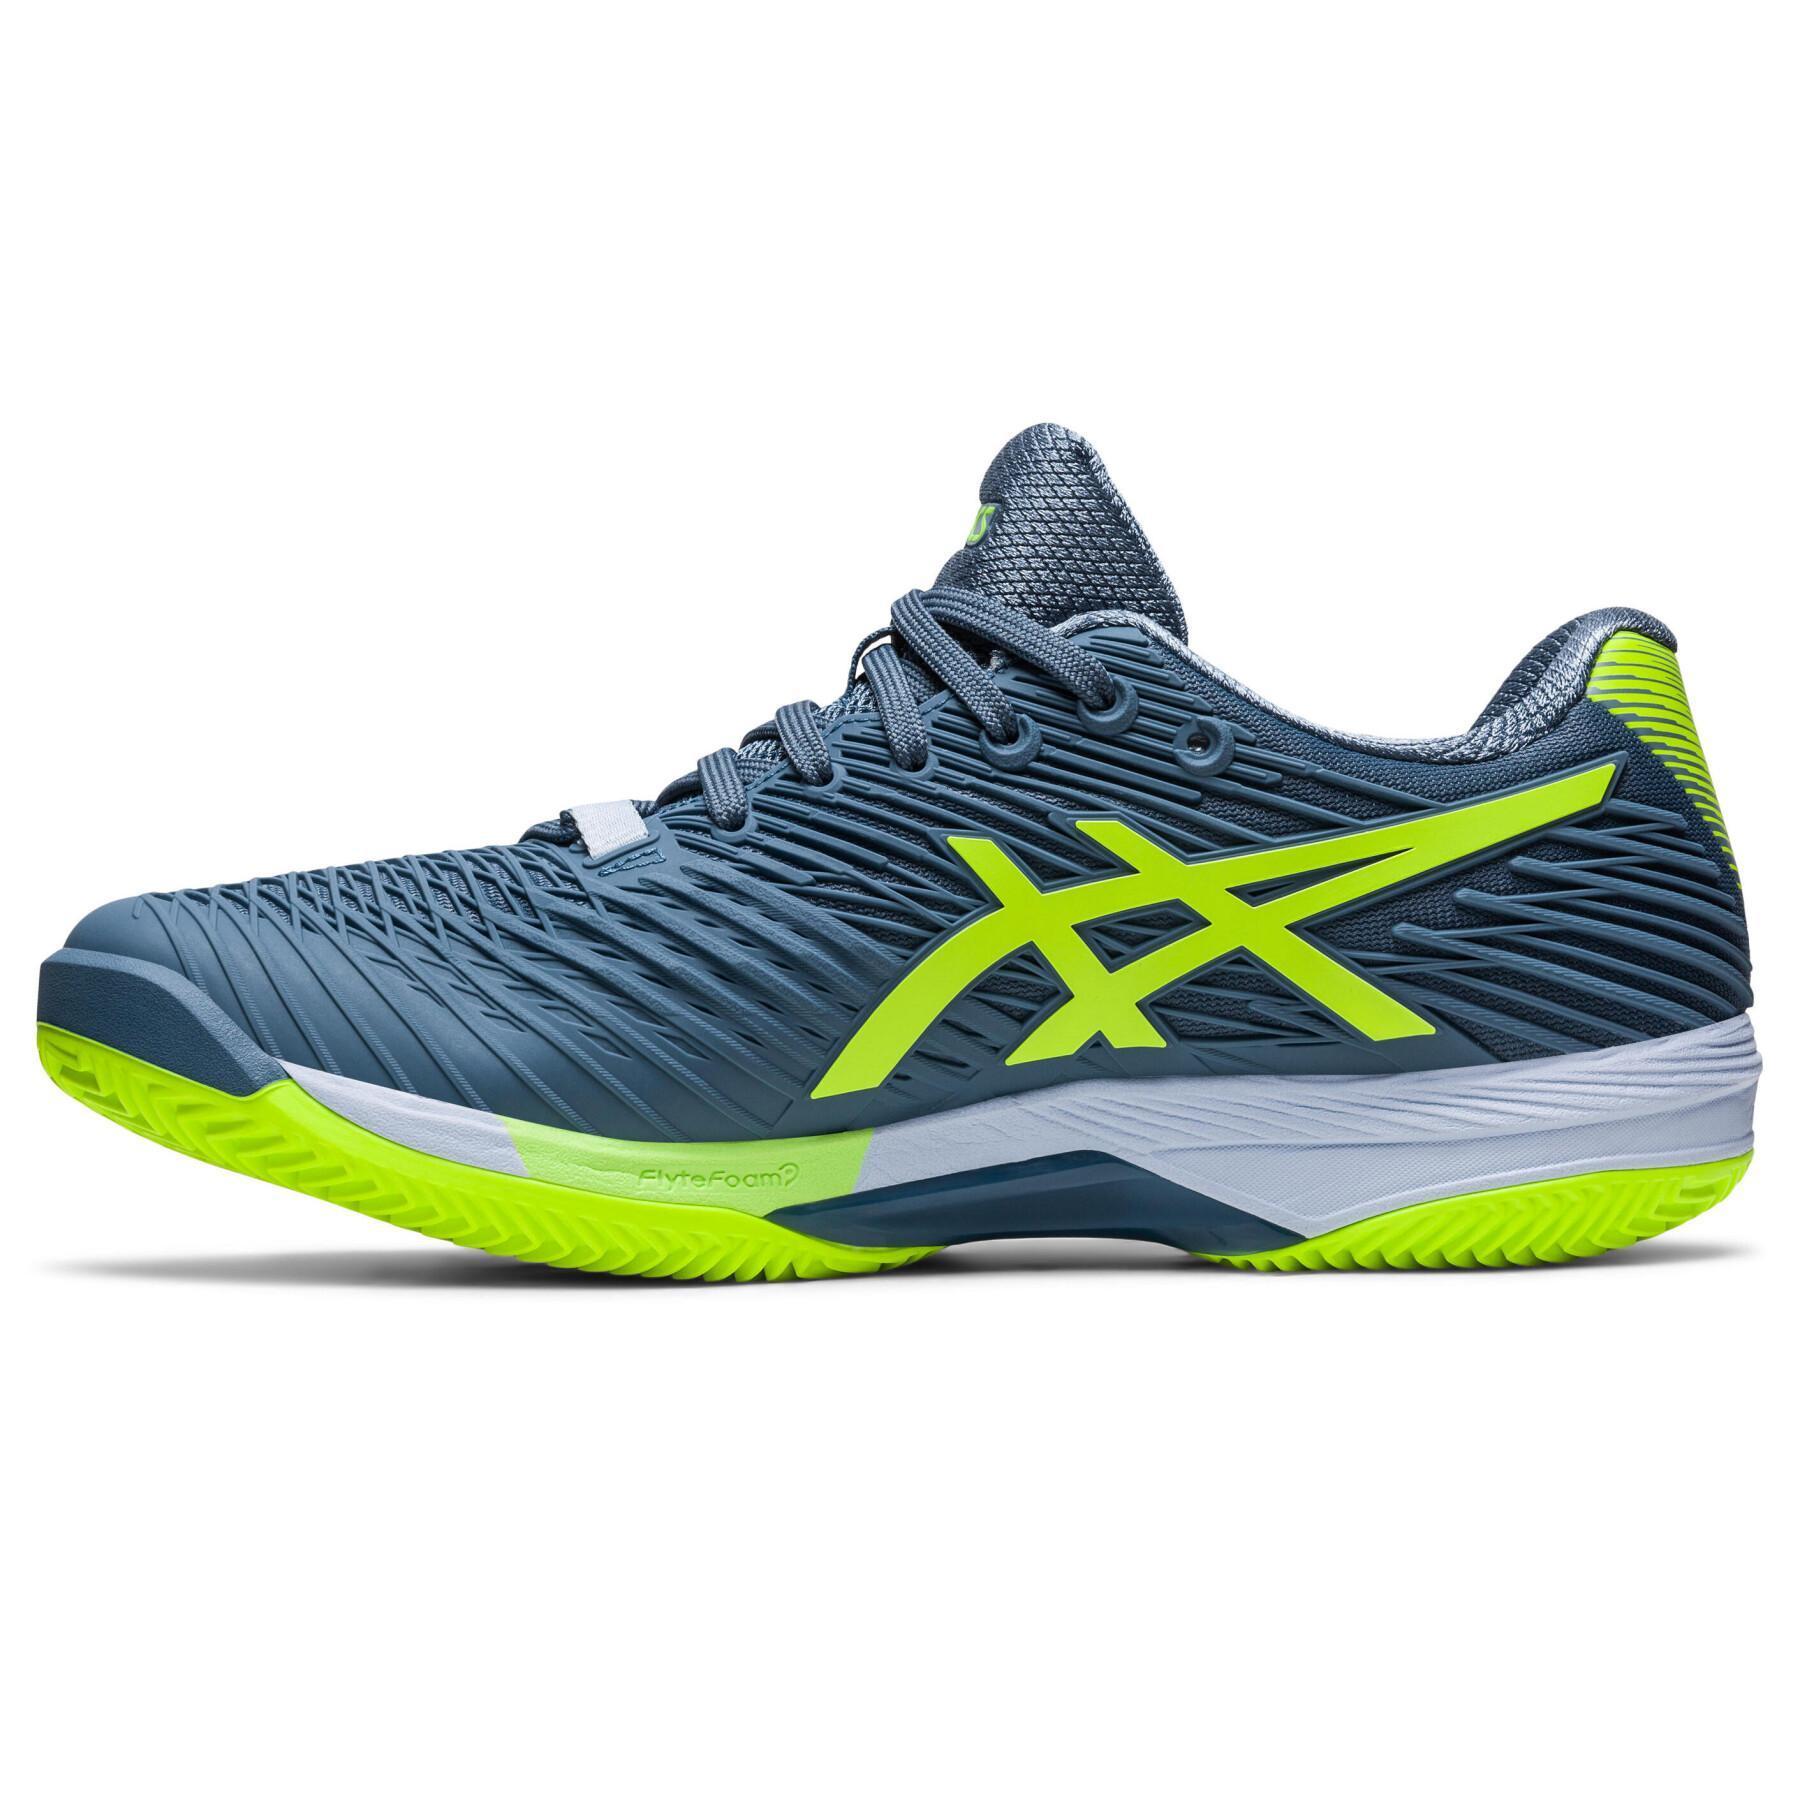 Tennis shoes Asics Solution Speed FF 2 Clay